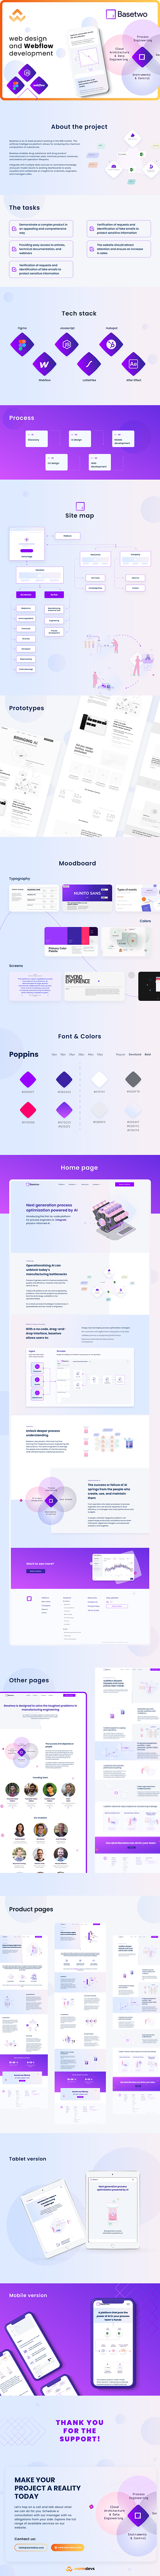 Basetwo case study dashboard design home page ui webflow website